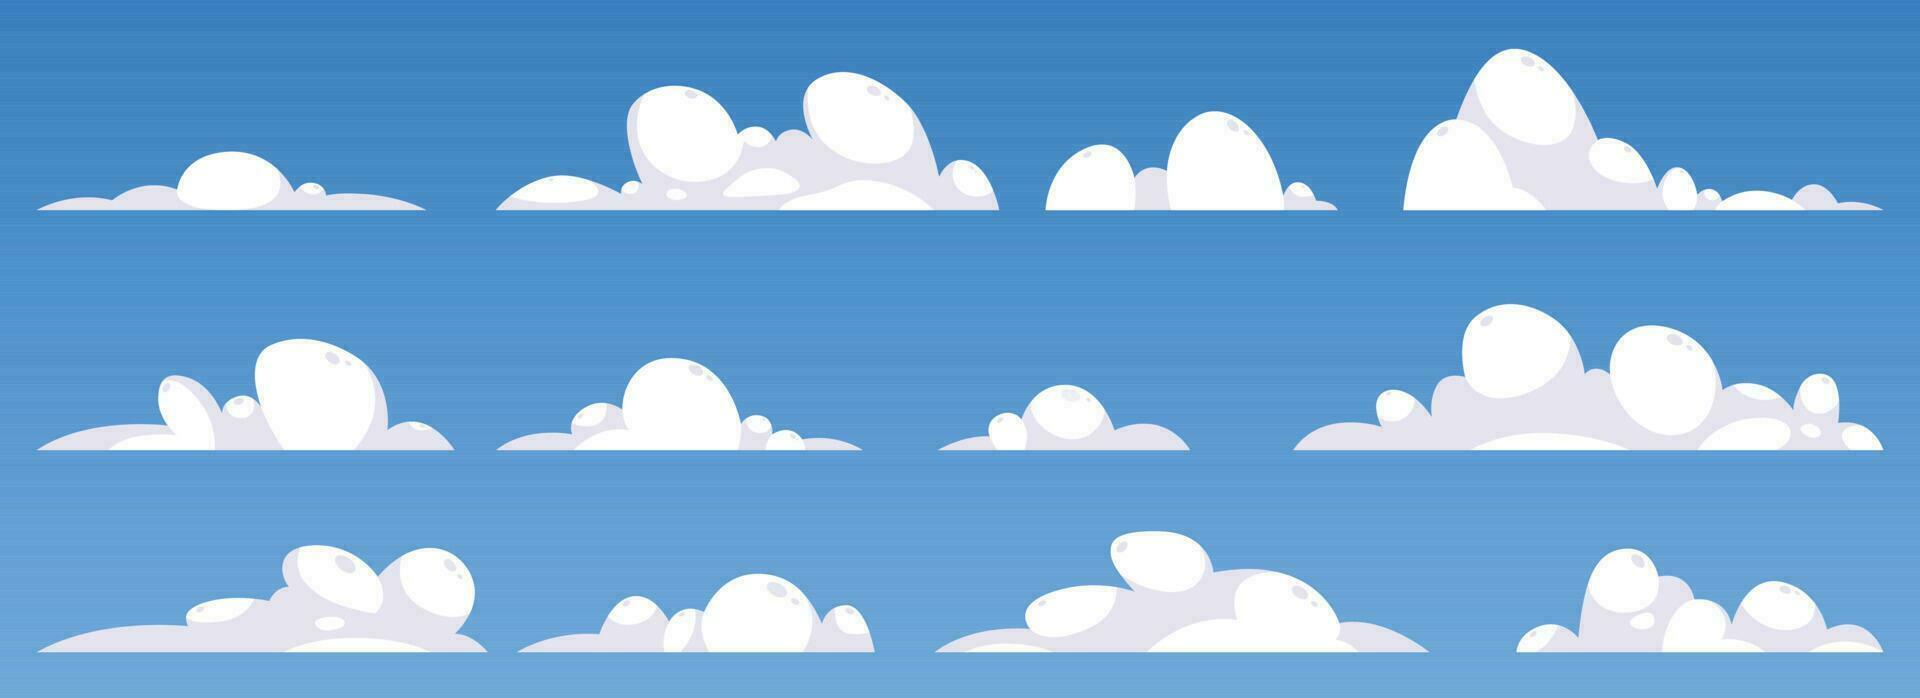 Cartoon clouds collection vector illustration isolated on white background